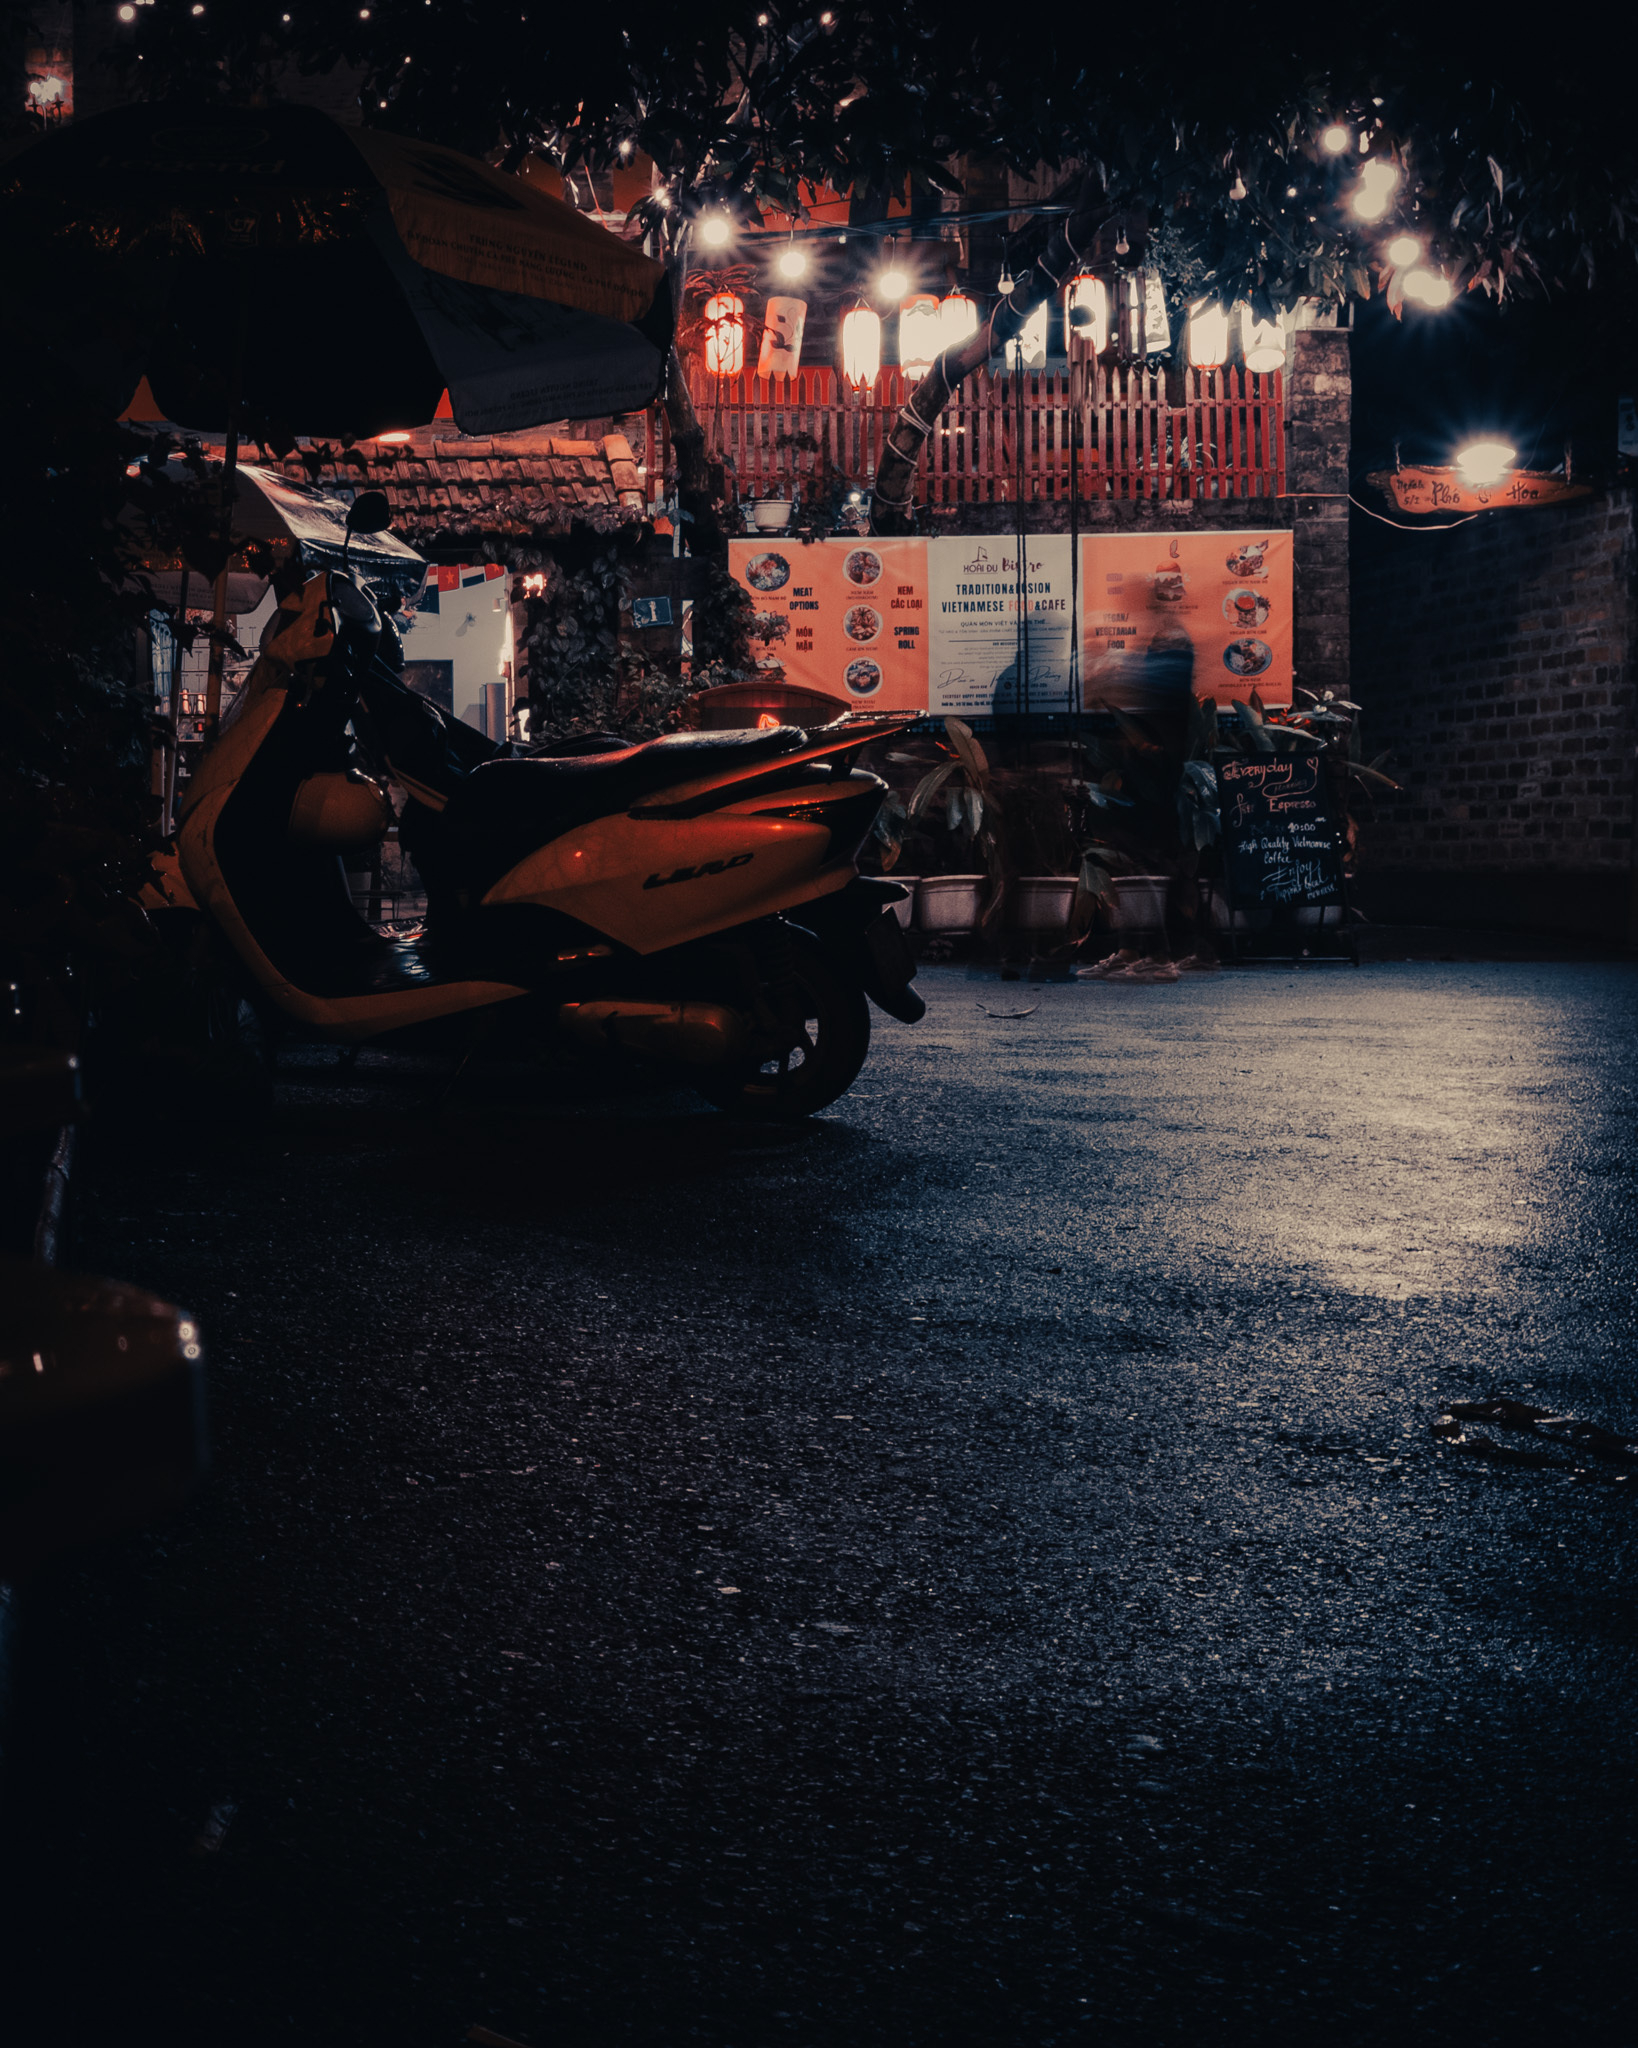 This is a dark shot with a bar/cafe glowing in orange lights in the background. Slightly hidden in focus are two persons. But these are mere shadows due to the extrem lighting/blurr. There's also a motorbike hidden in the front. Because Vietnam.